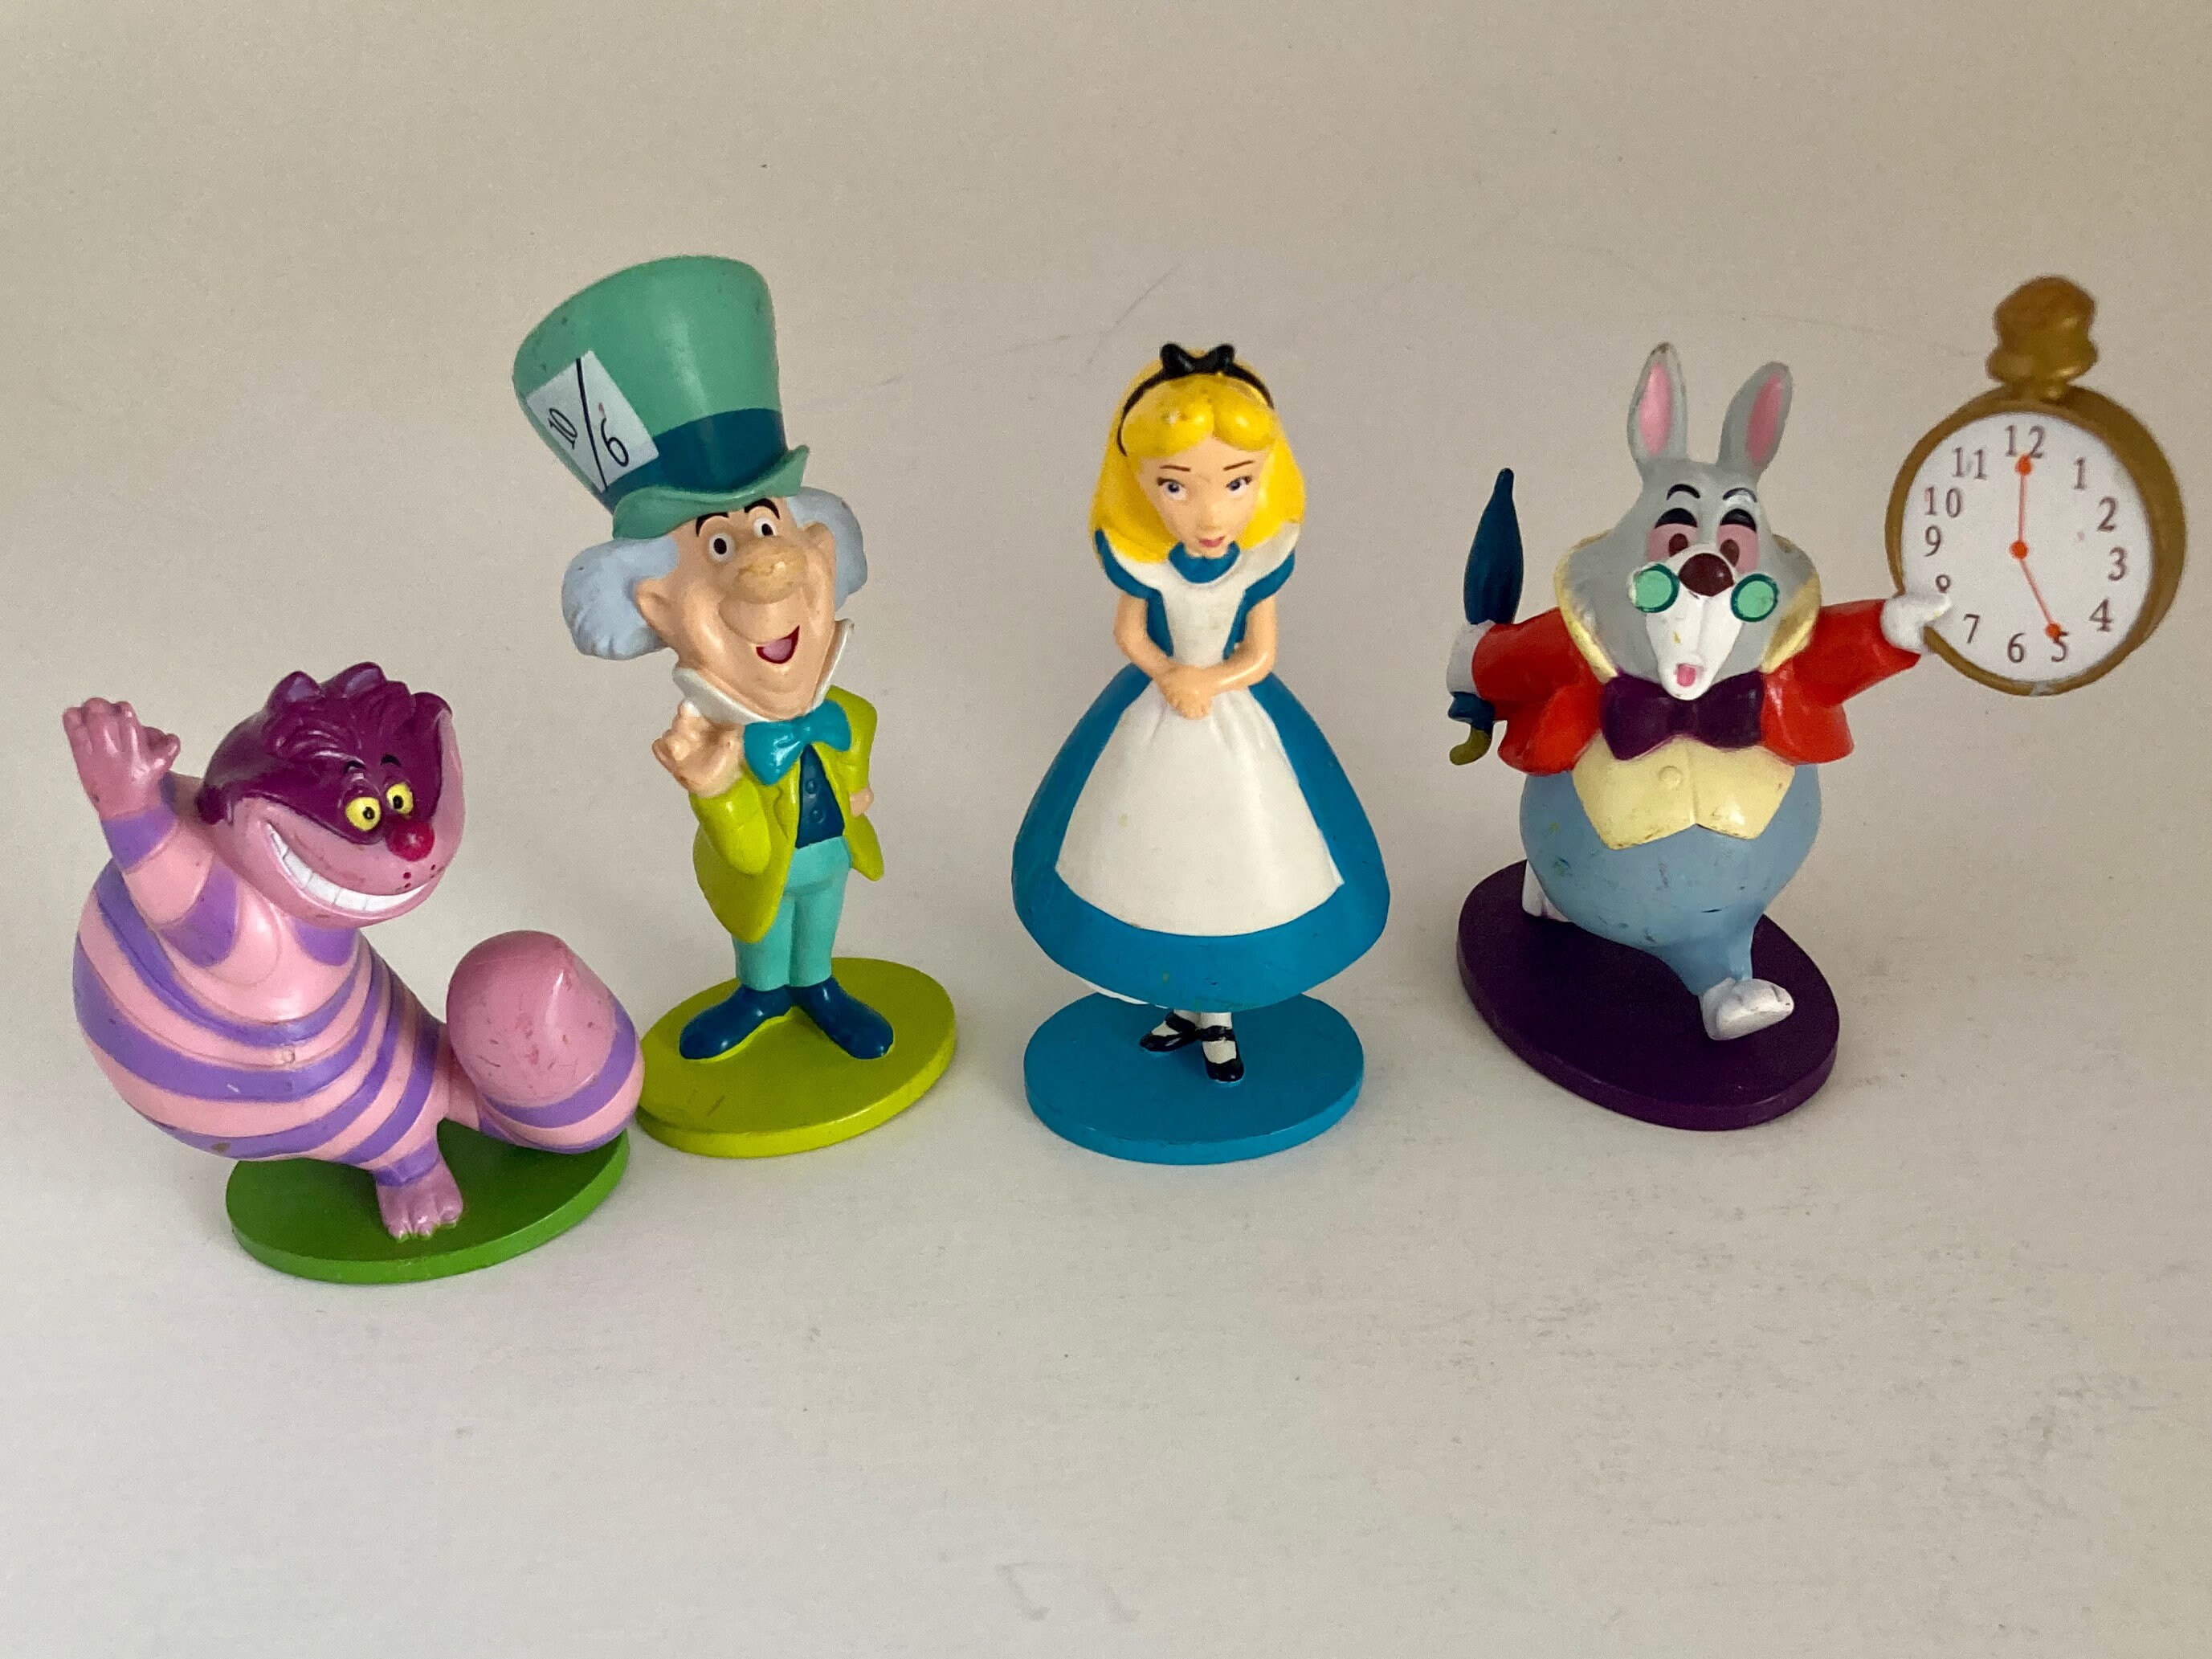 Alice in Wonderland, Action Figures, Set of 4, Alice, Cheshire Cat, Mad  Hatter, White Rabbit, 4 Inch Figures, Disney Characters, Kids Toys 